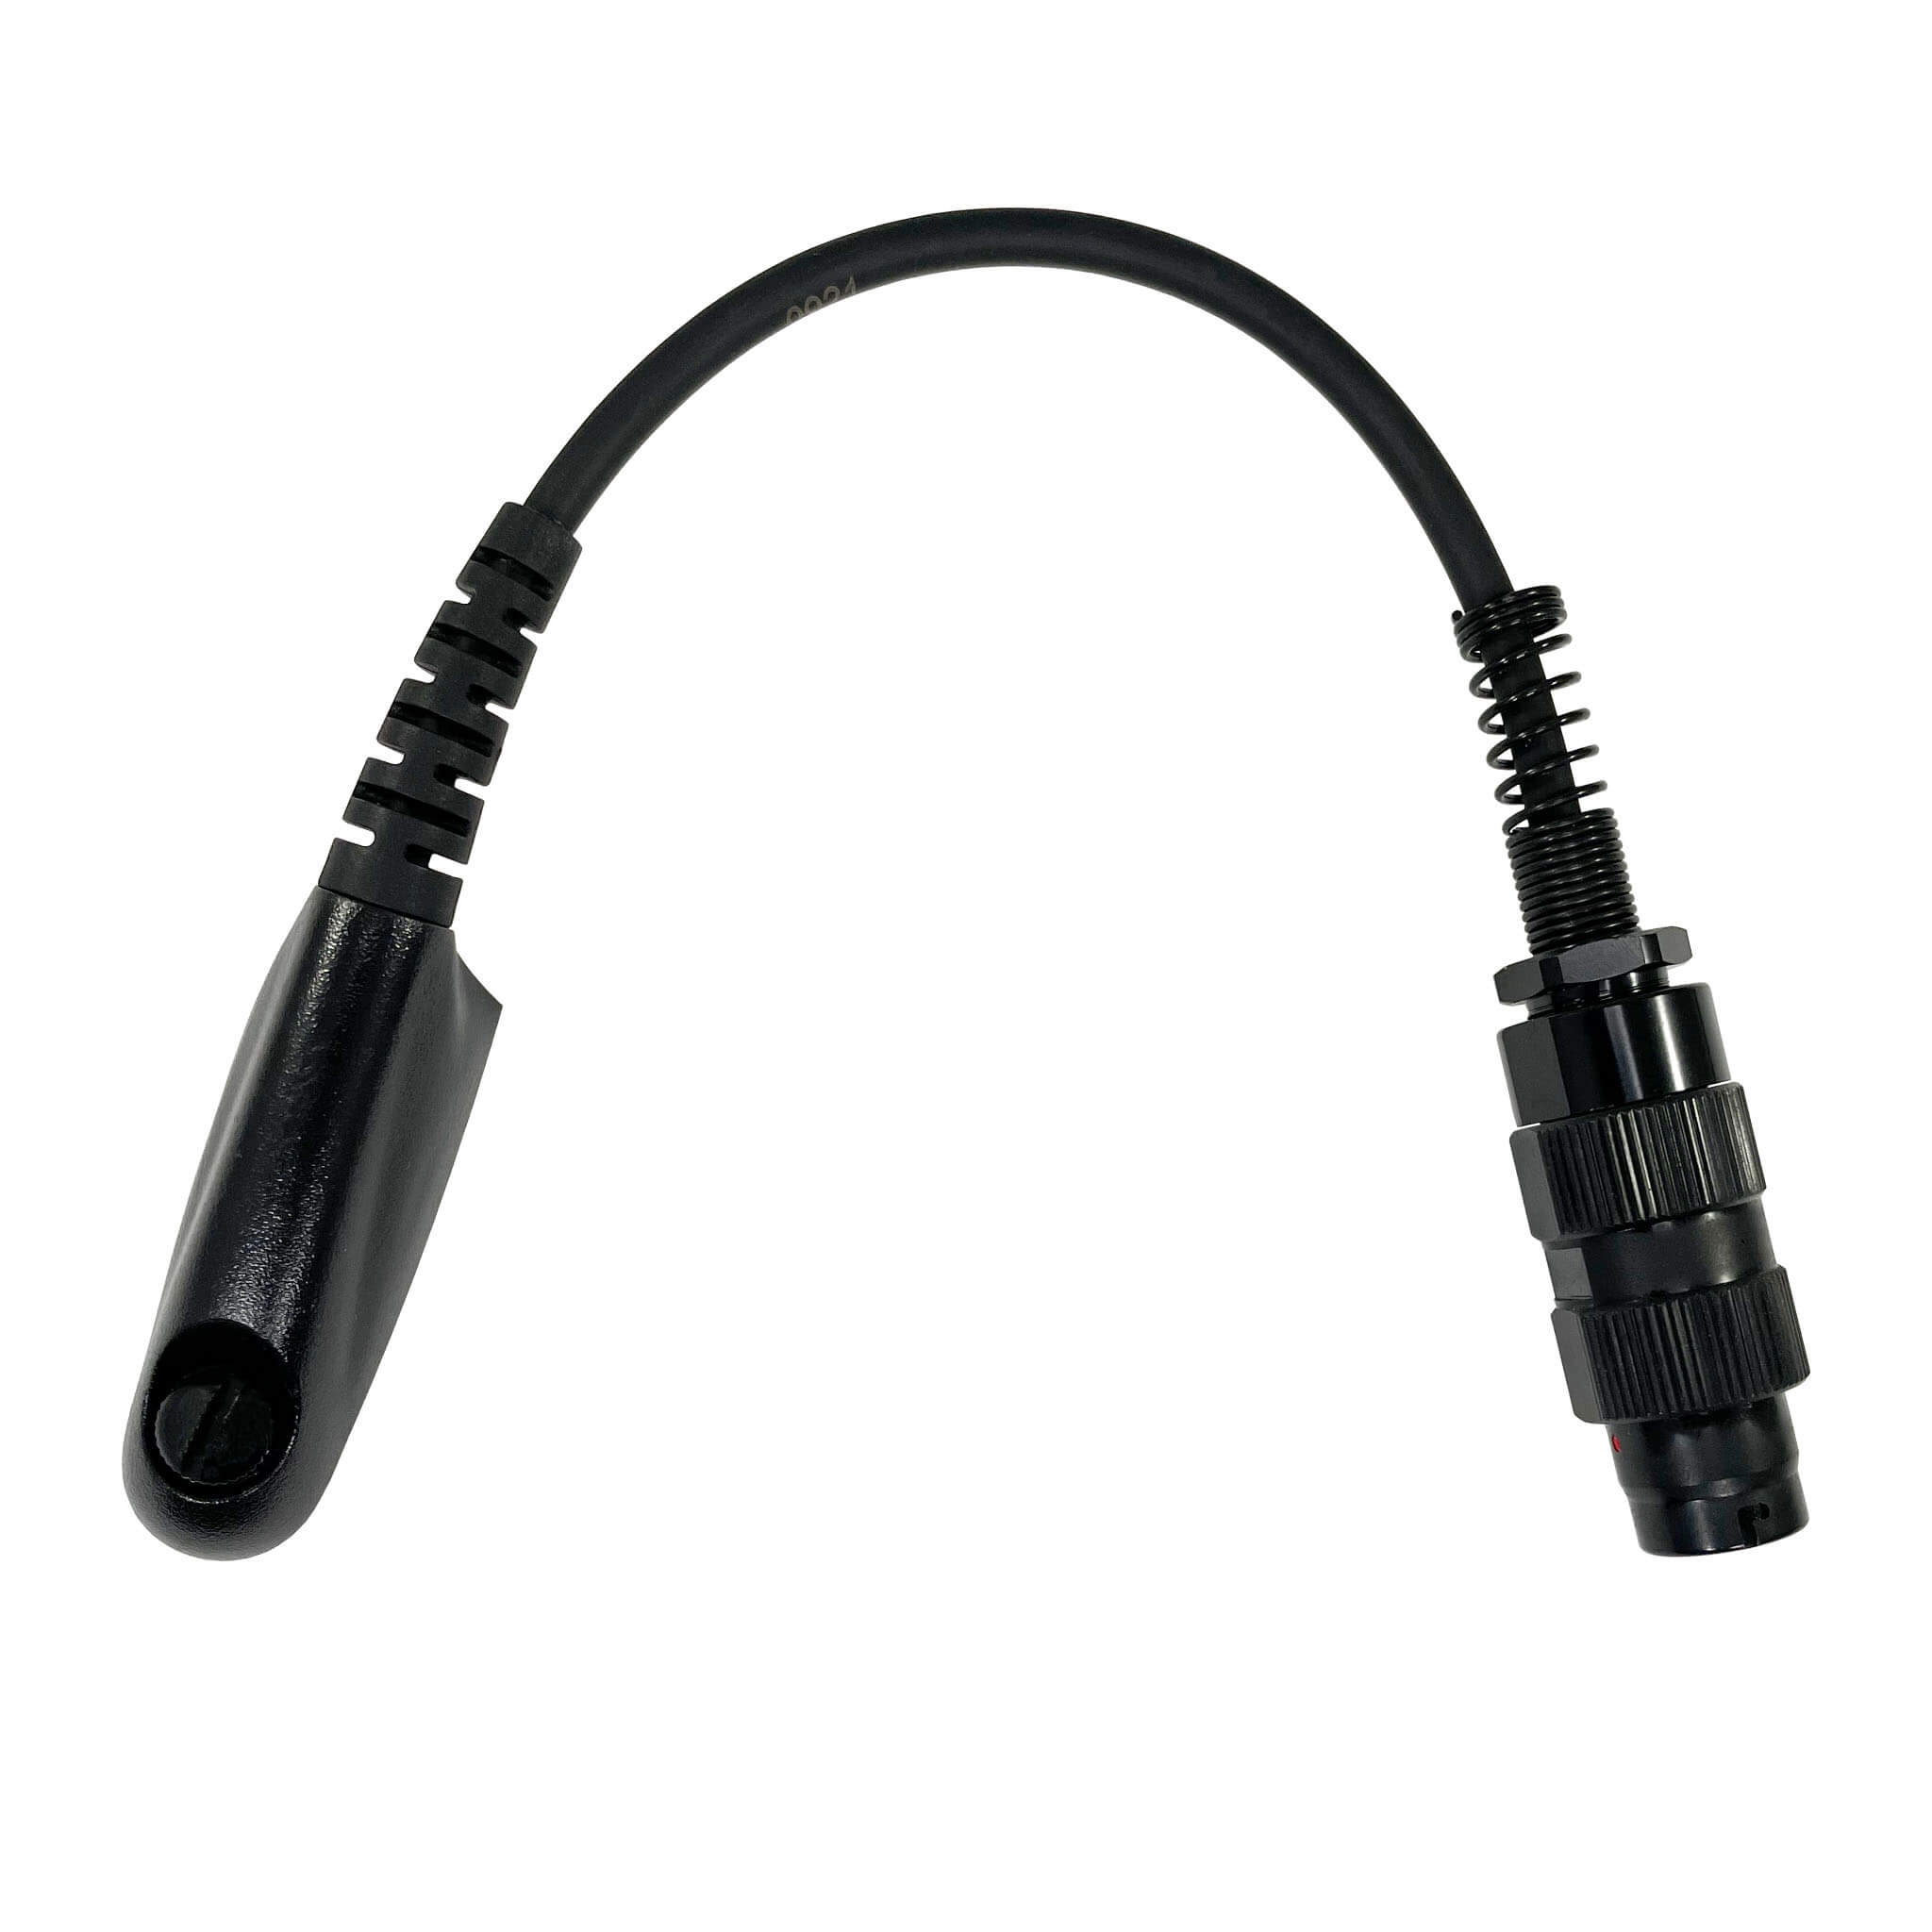 ADAPTER CABLE FOR Baofeng UV-9R Plus UV-XR Waterproof to 2 Pin for